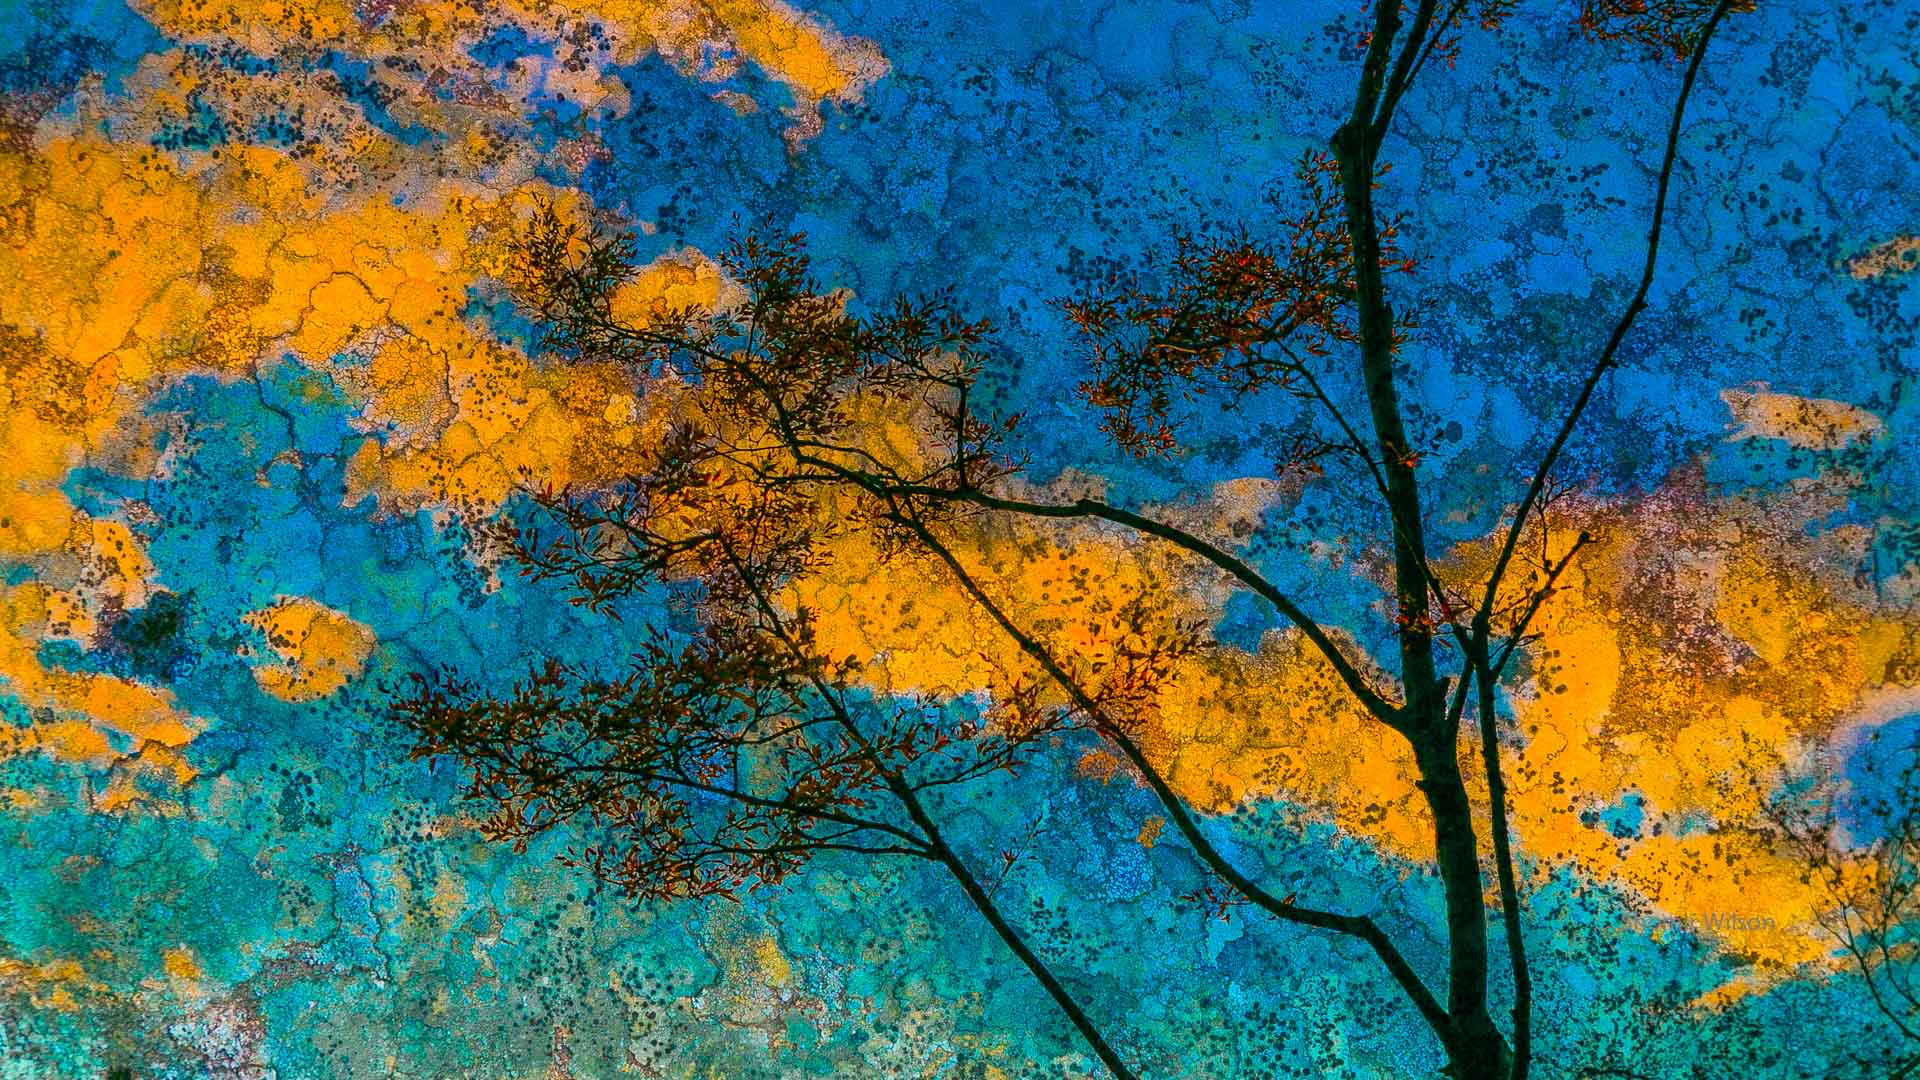 Tree branch and red flower buds against a peeling texture sky of blue with gold clouds